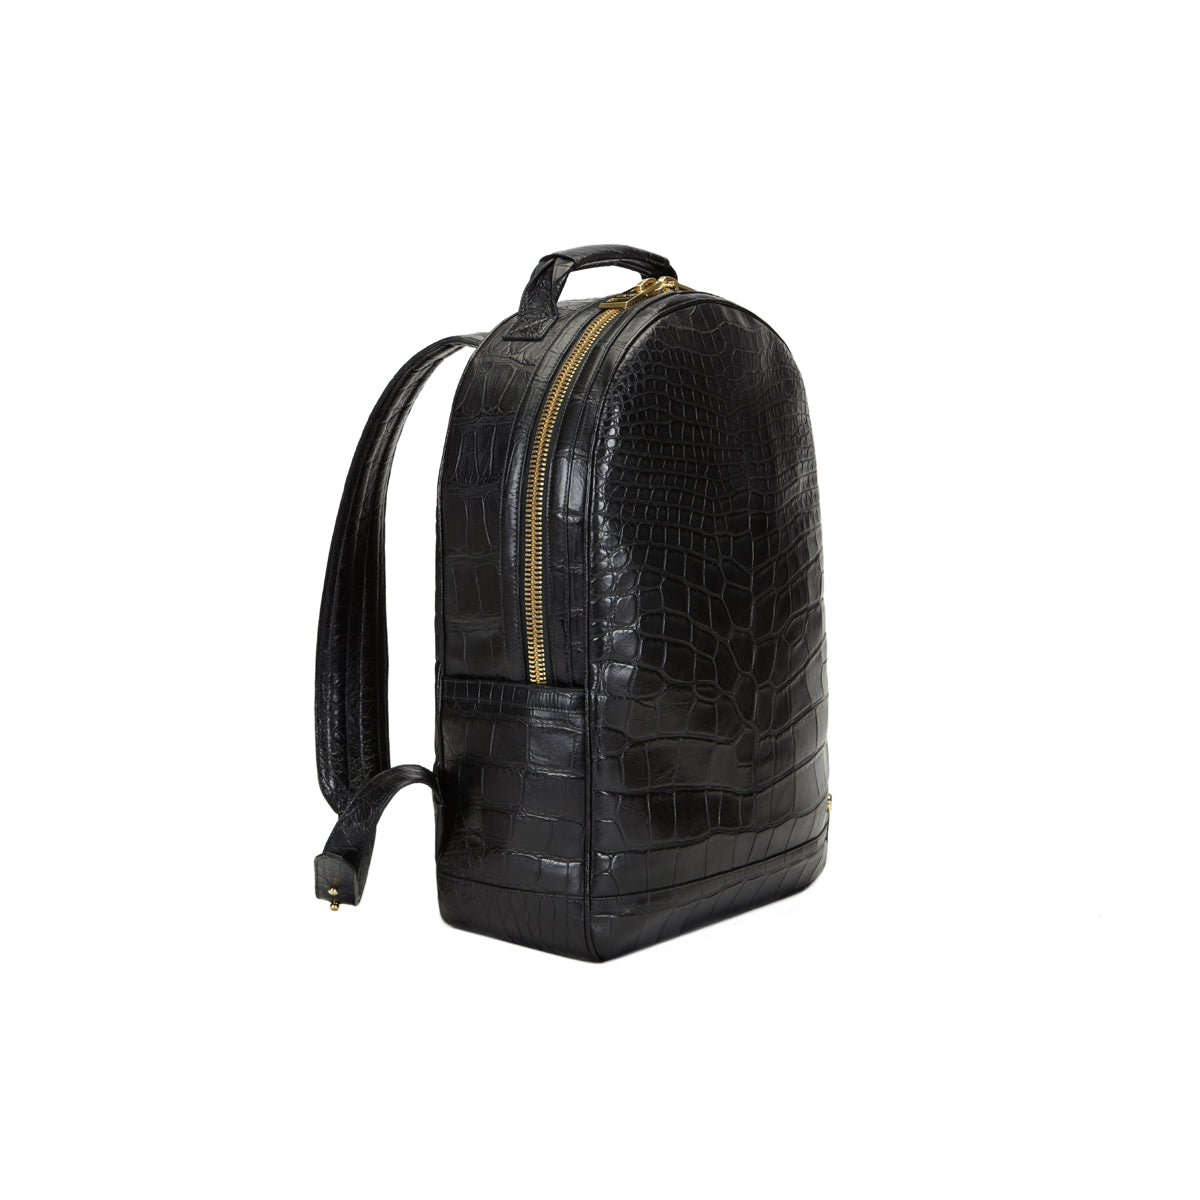 STALVEY Brighton Flat Front Backpack in Large Black Alligator Front View